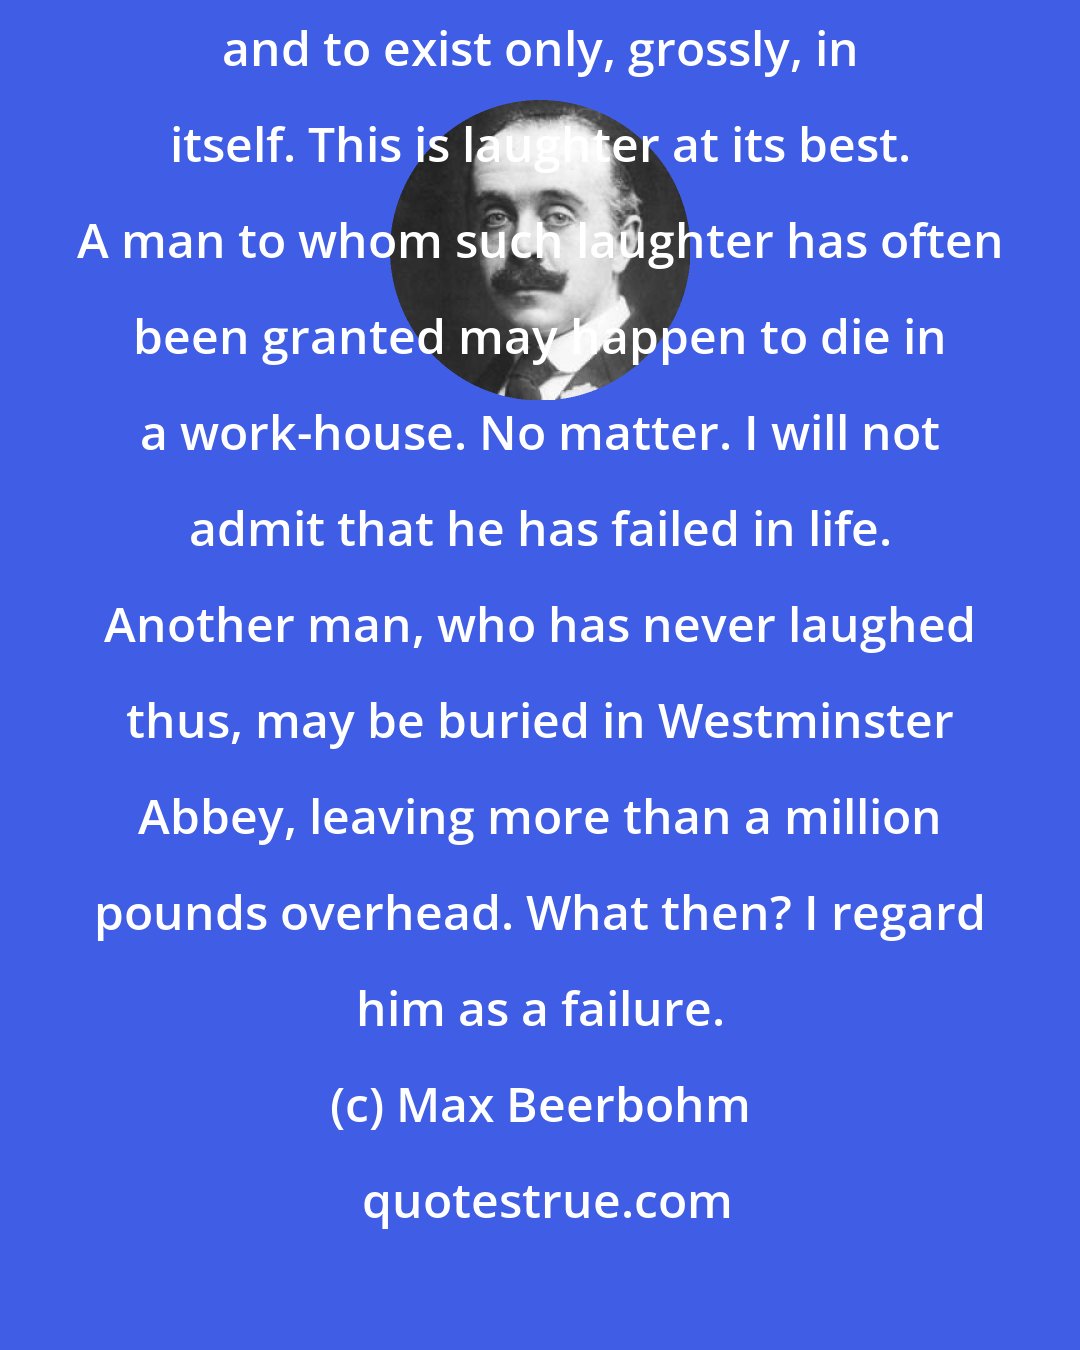 Max Beerbohm: There is laughter that goes so far as to lose all touch with its motive, and to exist only, grossly, in itself. This is laughter at its best. A man to whom such laughter has often been granted may happen to die in a work-house. No matter. I will not admit that he has failed in life. Another man, who has never laughed thus, may be buried in Westminster Abbey, leaving more than a million pounds overhead. What then? I regard him as a failure.